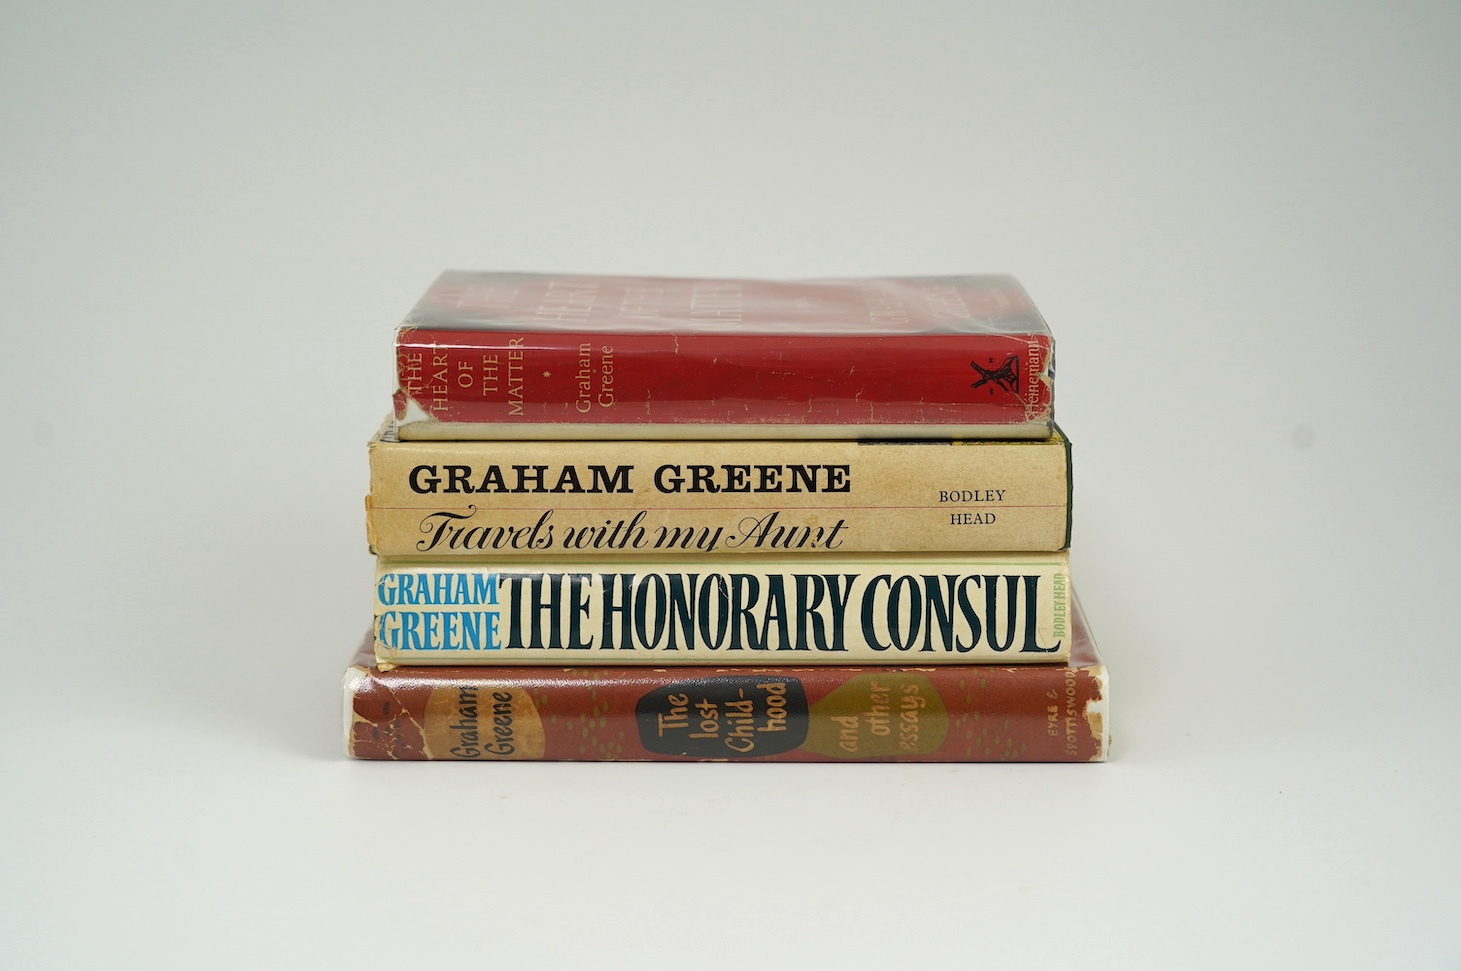 Greene, Graham - The Heart of the Matter, 1948. The Lost Childhood, 1951. Travels with my Aunt, 1969. The Honorary Consul, 1973, all 1st editions (4)